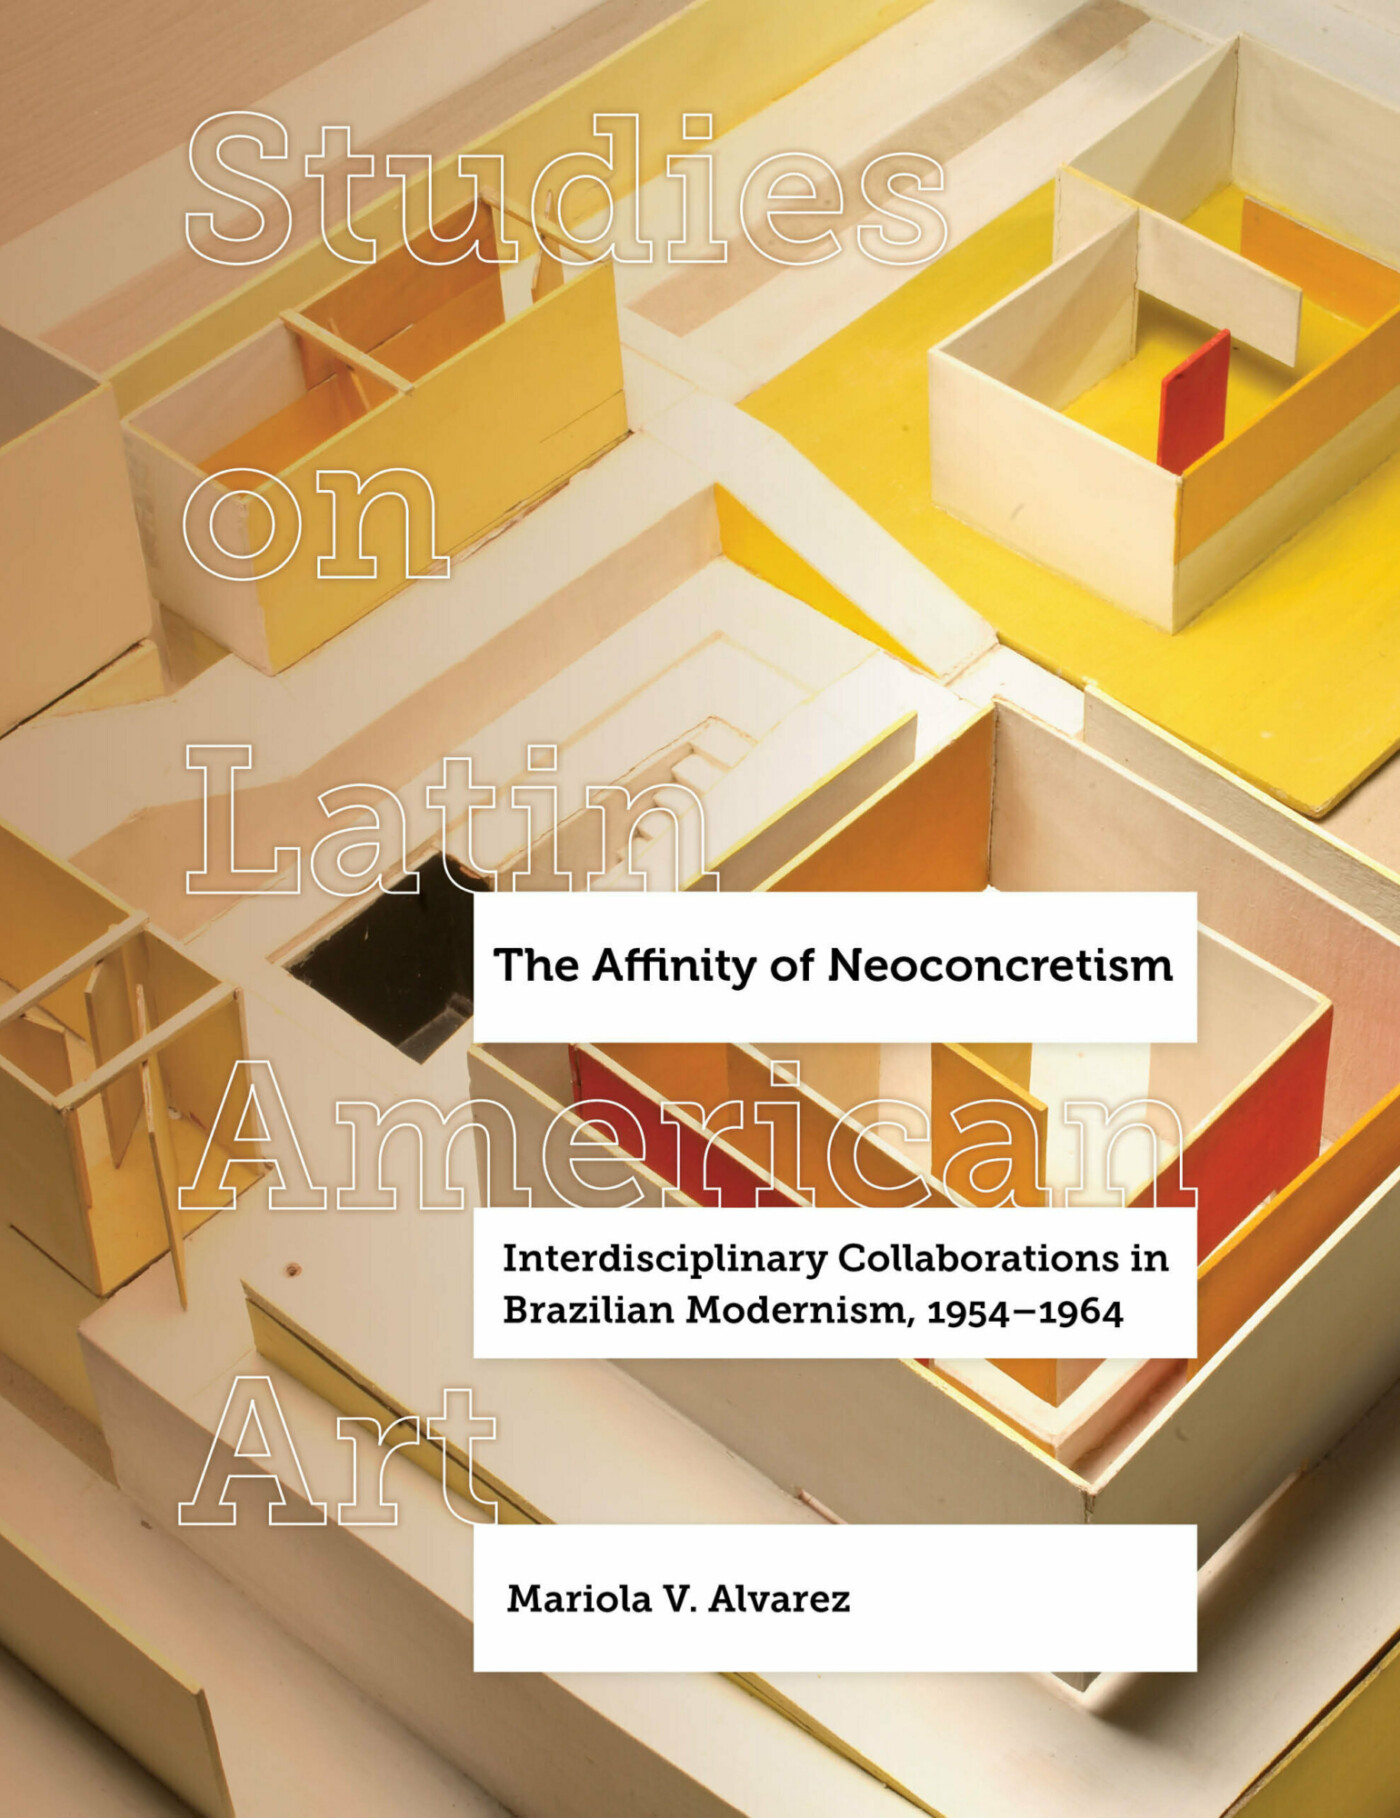 Book cover showing a maquette of an exhibition space with portions of vivid yellow and pink modeling board. Overlay text shows the title of the book and the name of the series, Studies on Latin American Art.